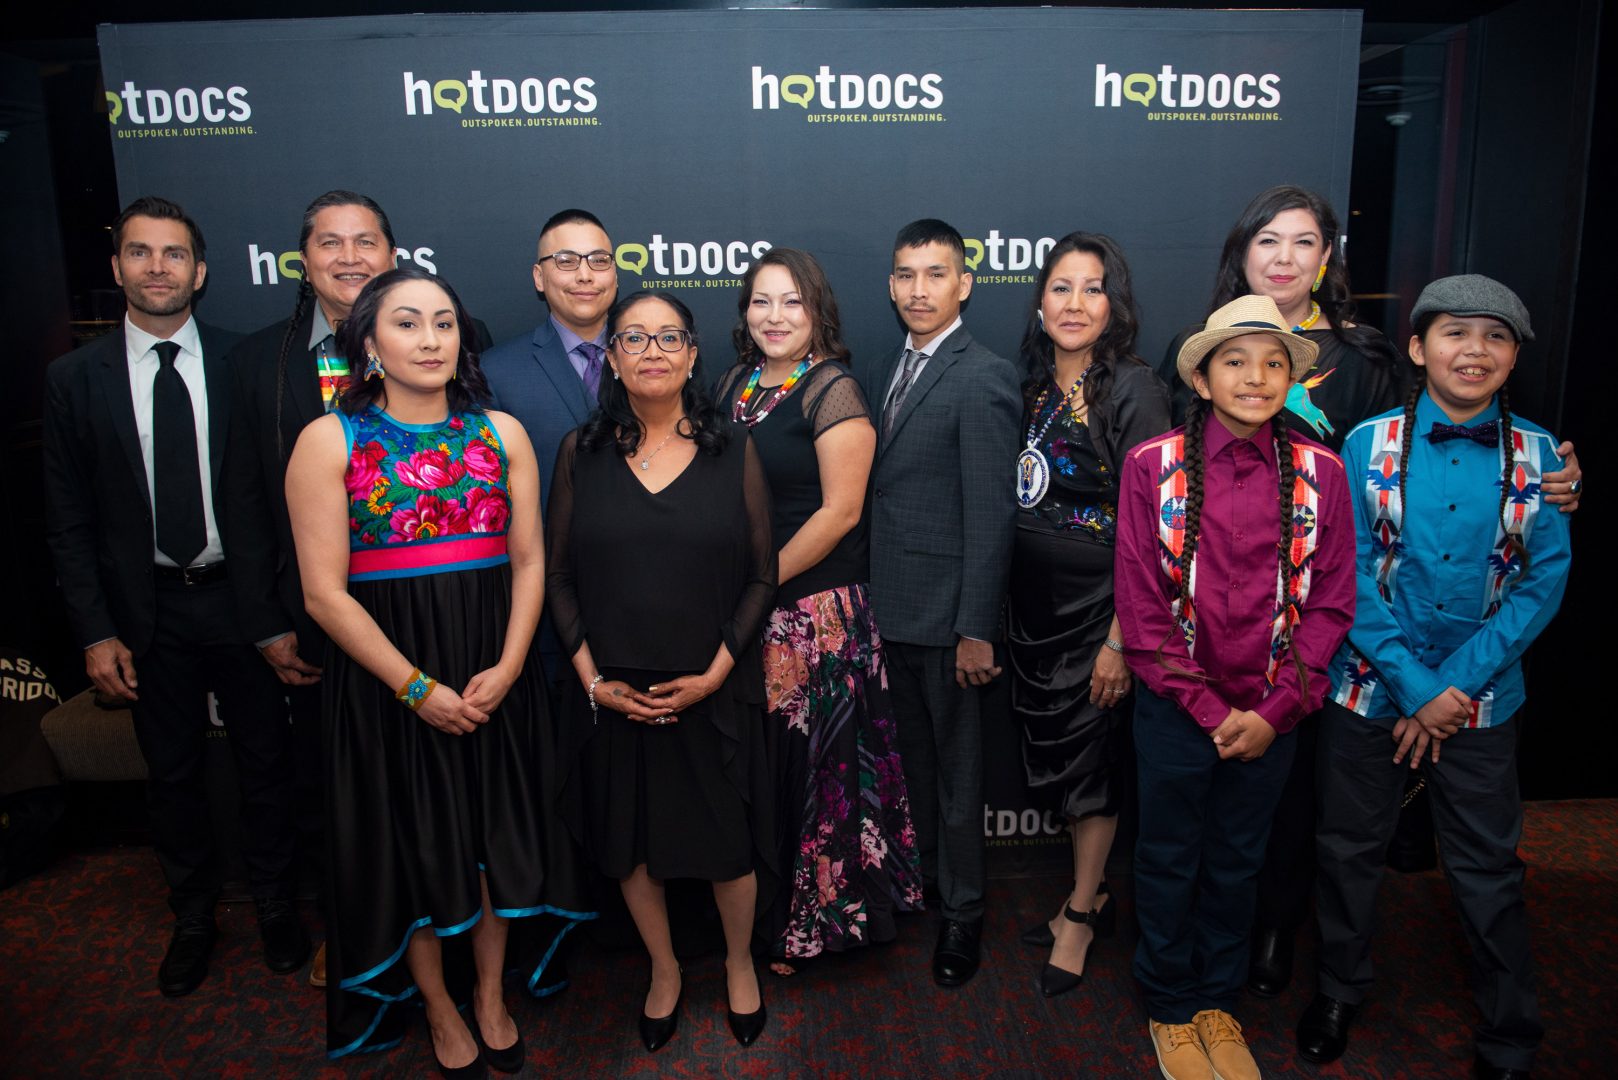 Tasha Hubbard (back row, first from the right) with Colten Boushie's family on opening night at the Hot Docs Film Festival. (Photo by Joseph Michael Howarth, courtesy of Hot Docs)